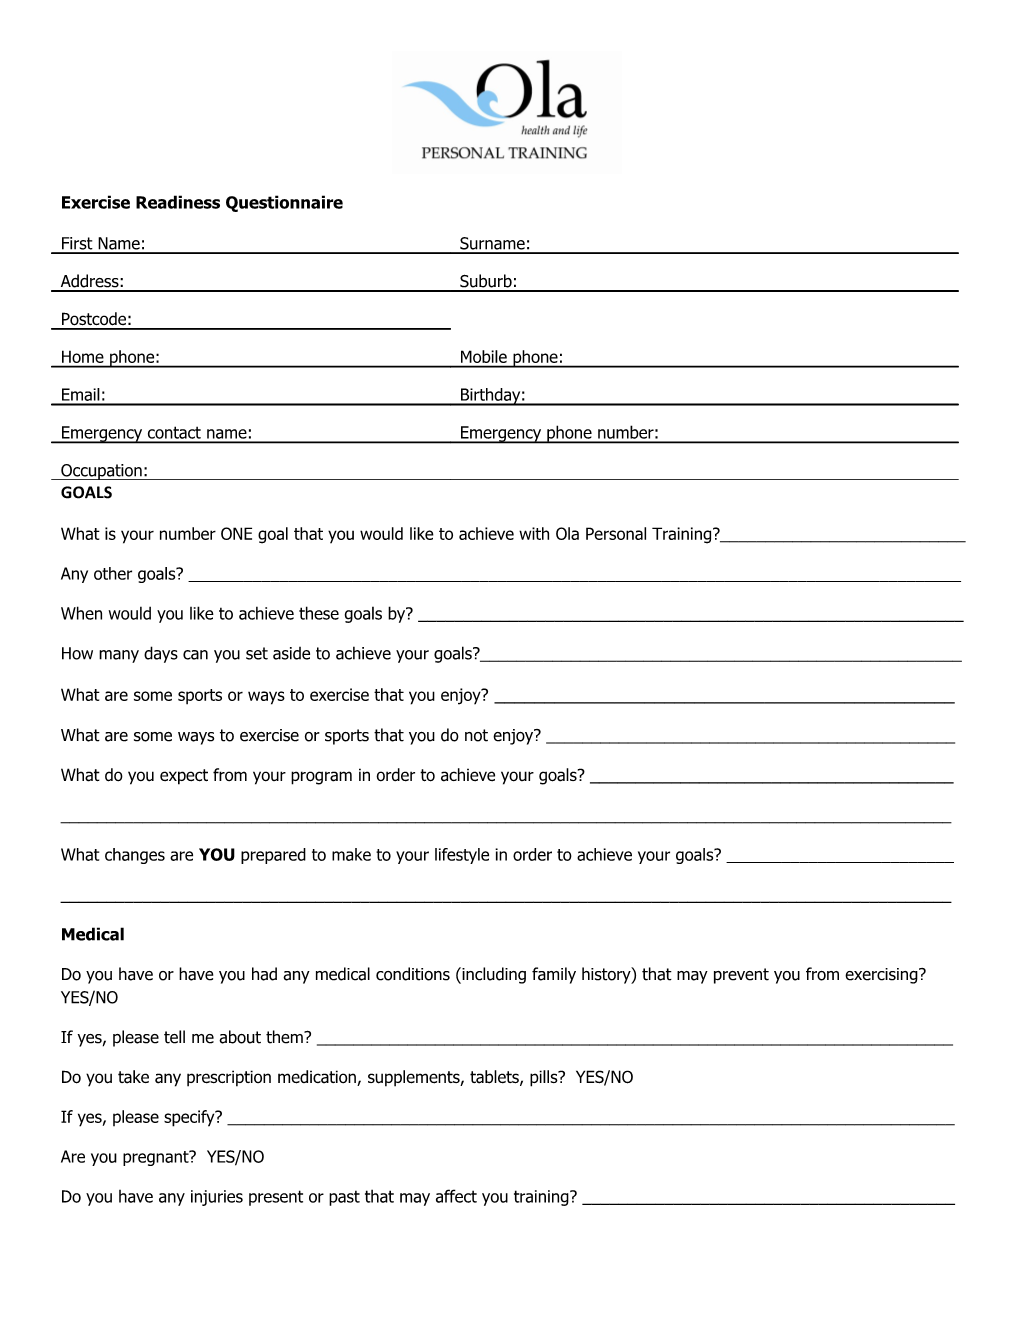 Exercise Readiness Questionnaire